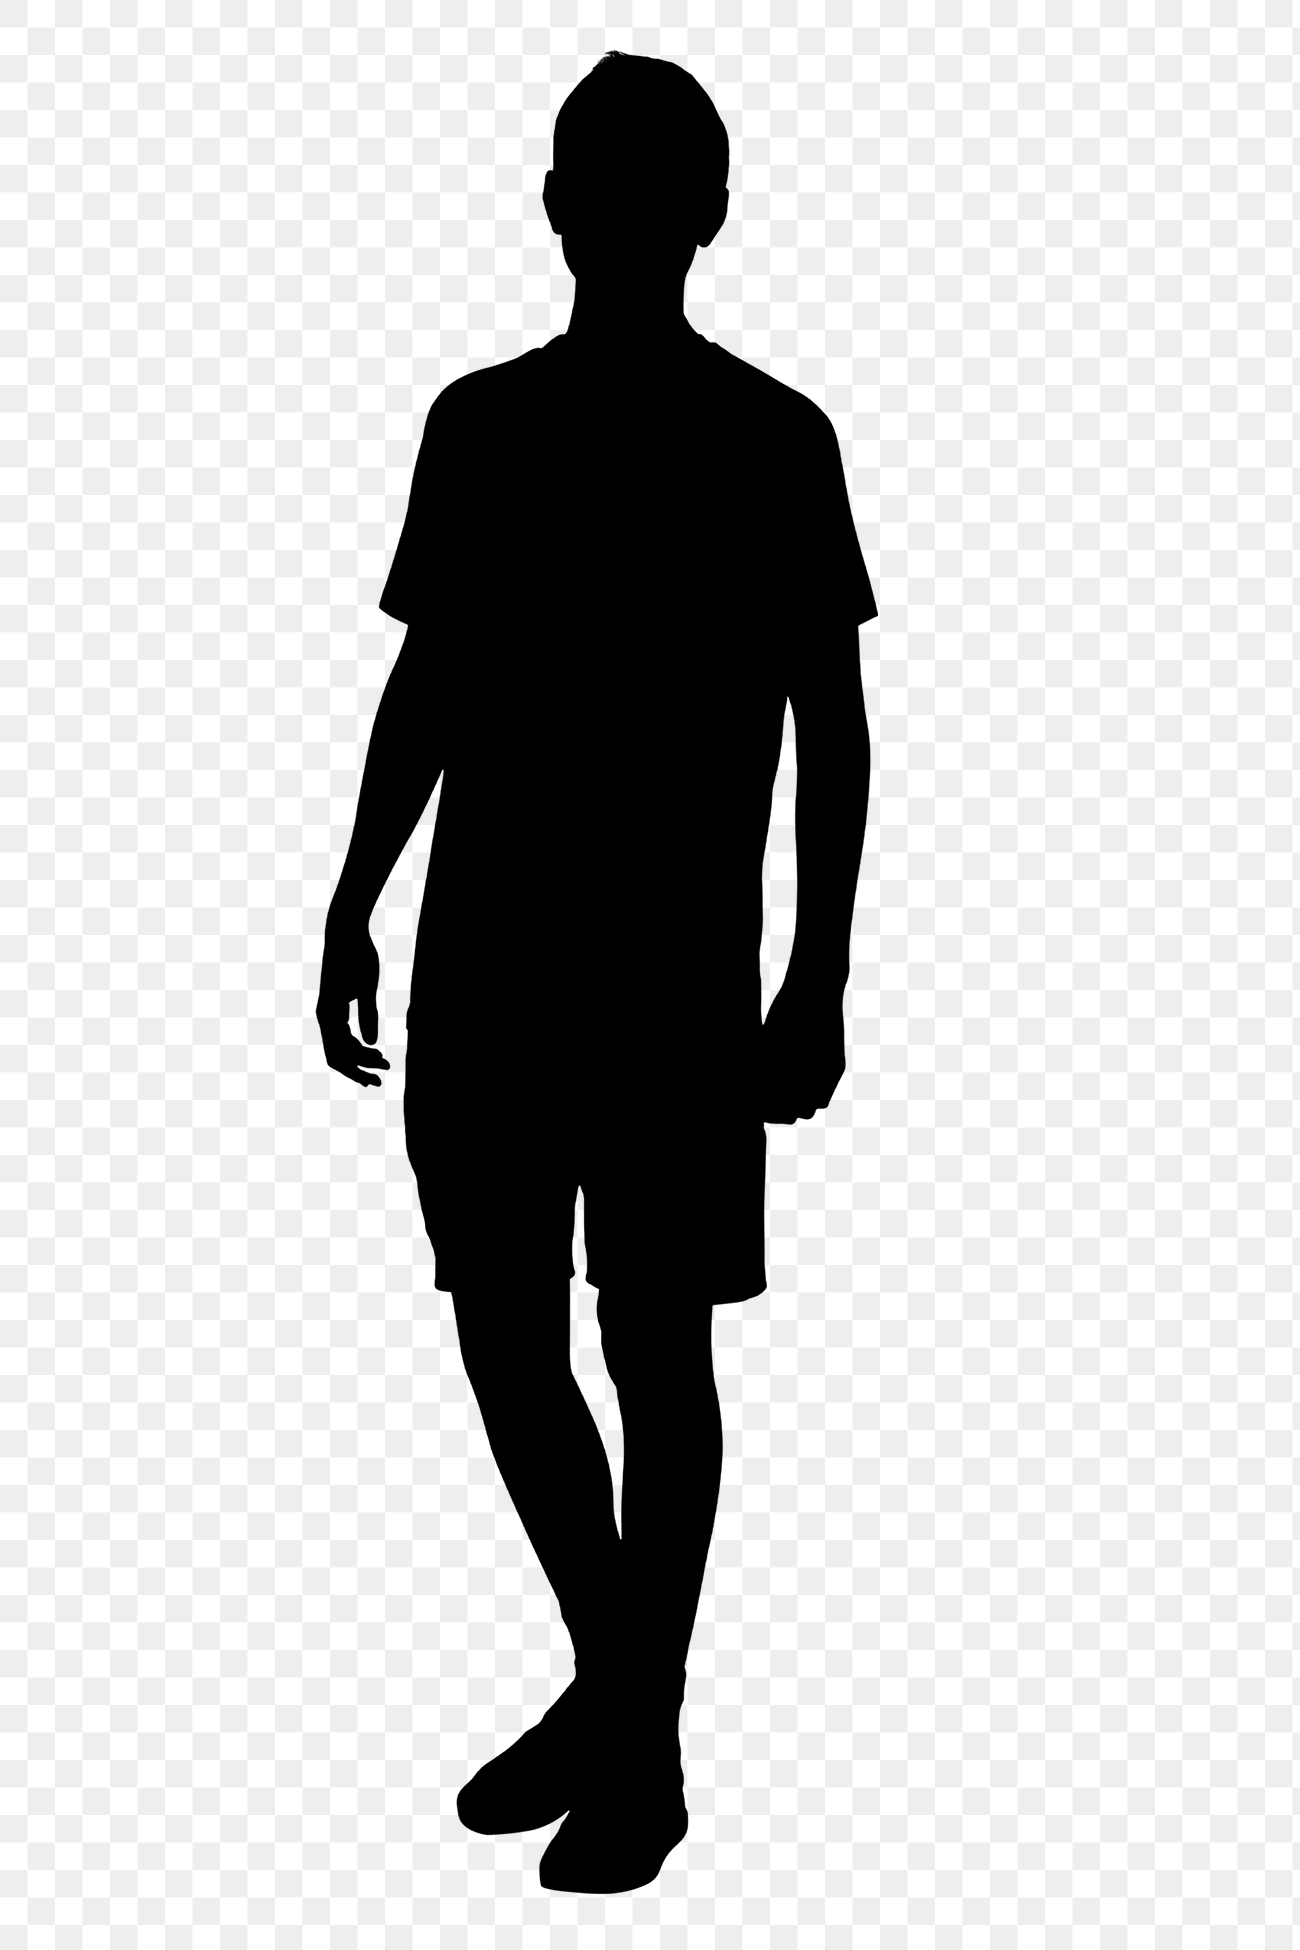 Casual man silhouette png sticker, | Premium PNG - rawpixel